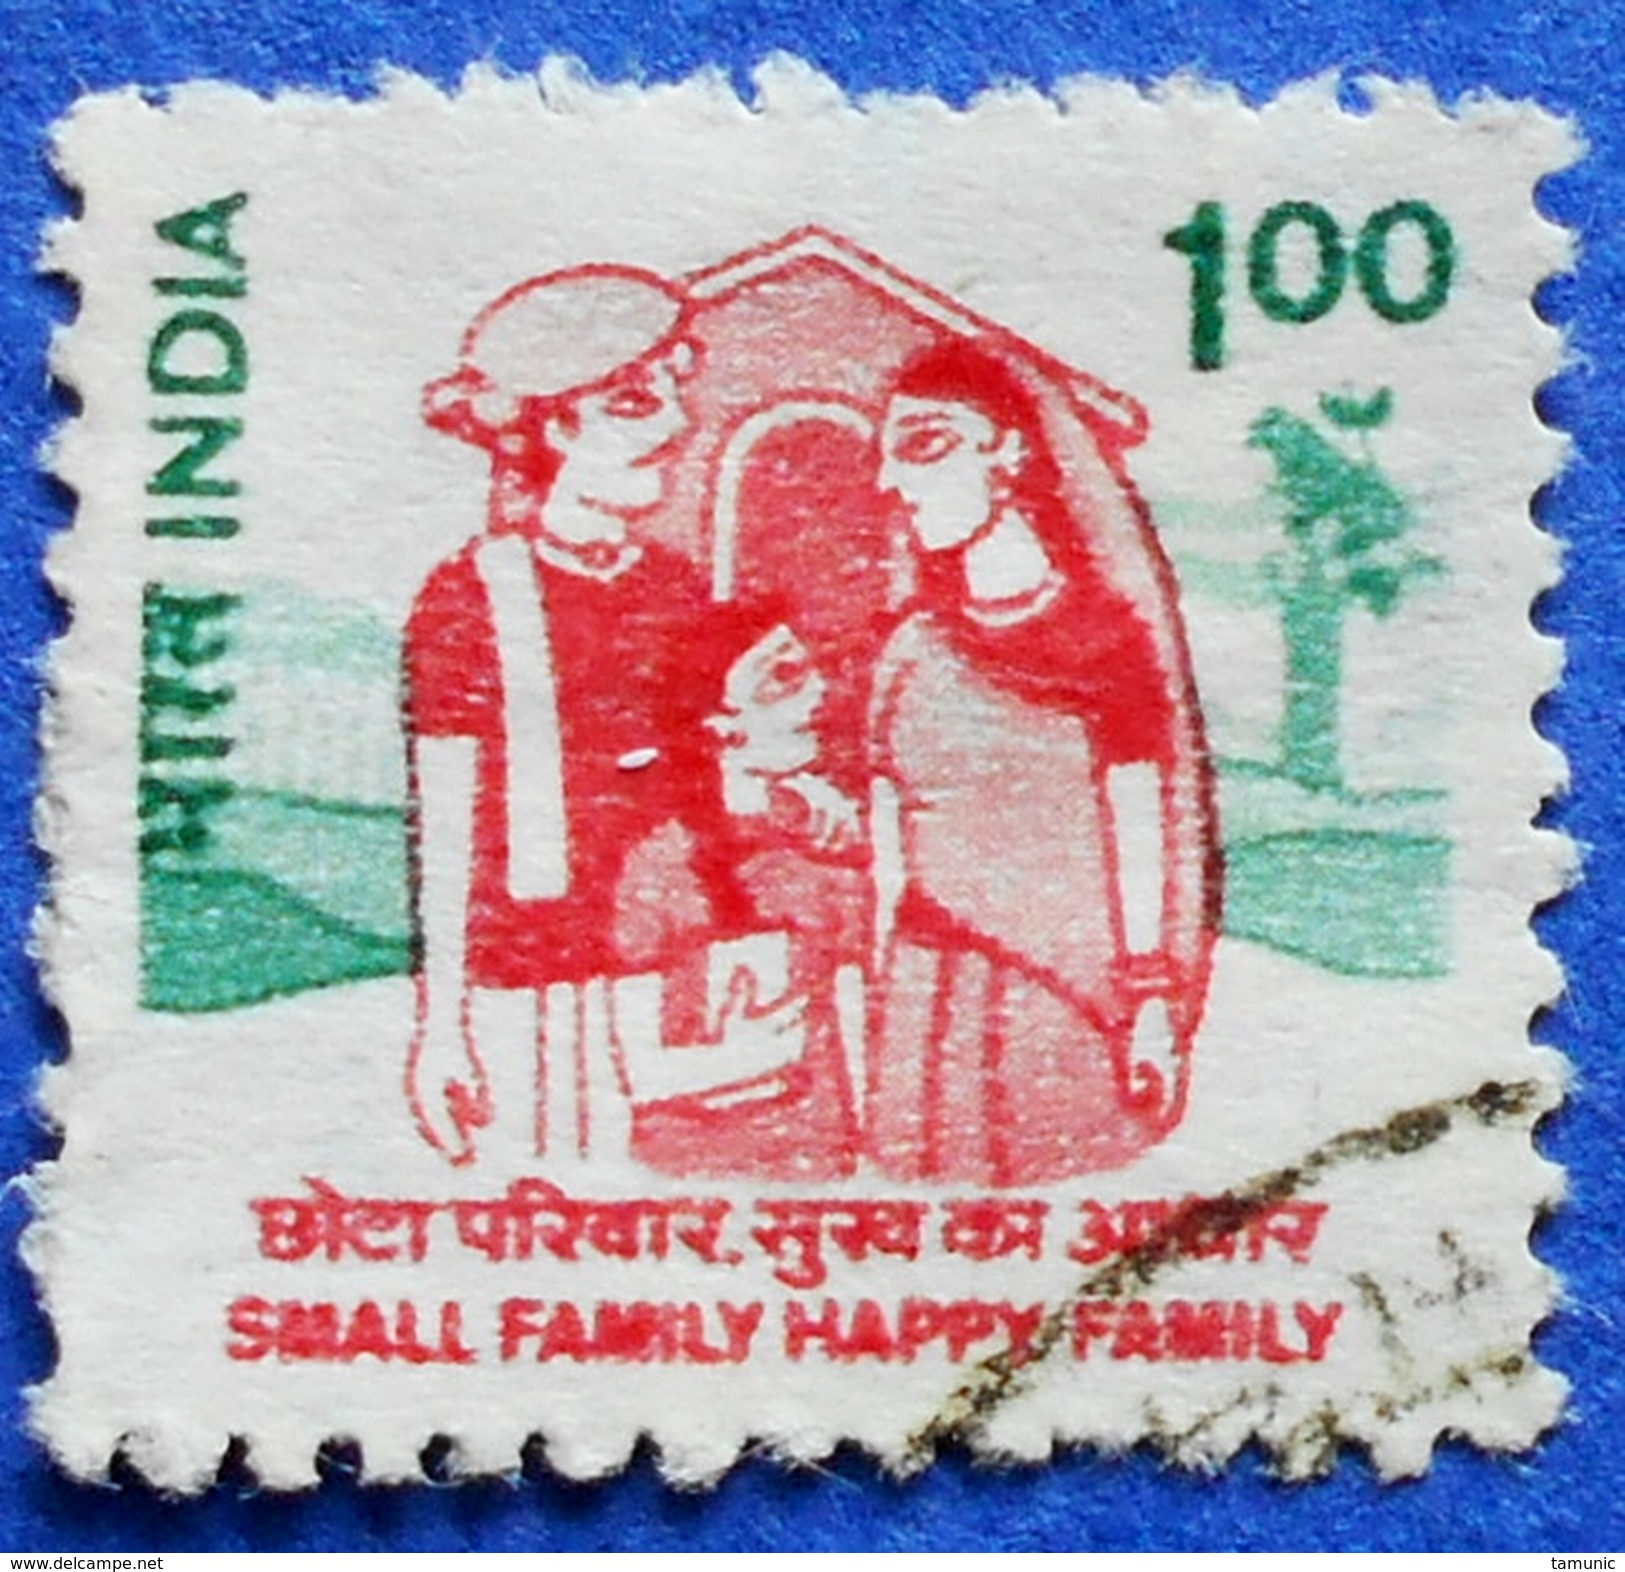 INDIA 1,00 1994 FAMILY PLANNING SMALL FAMILY HAPPY FAMILY - USED - Usados